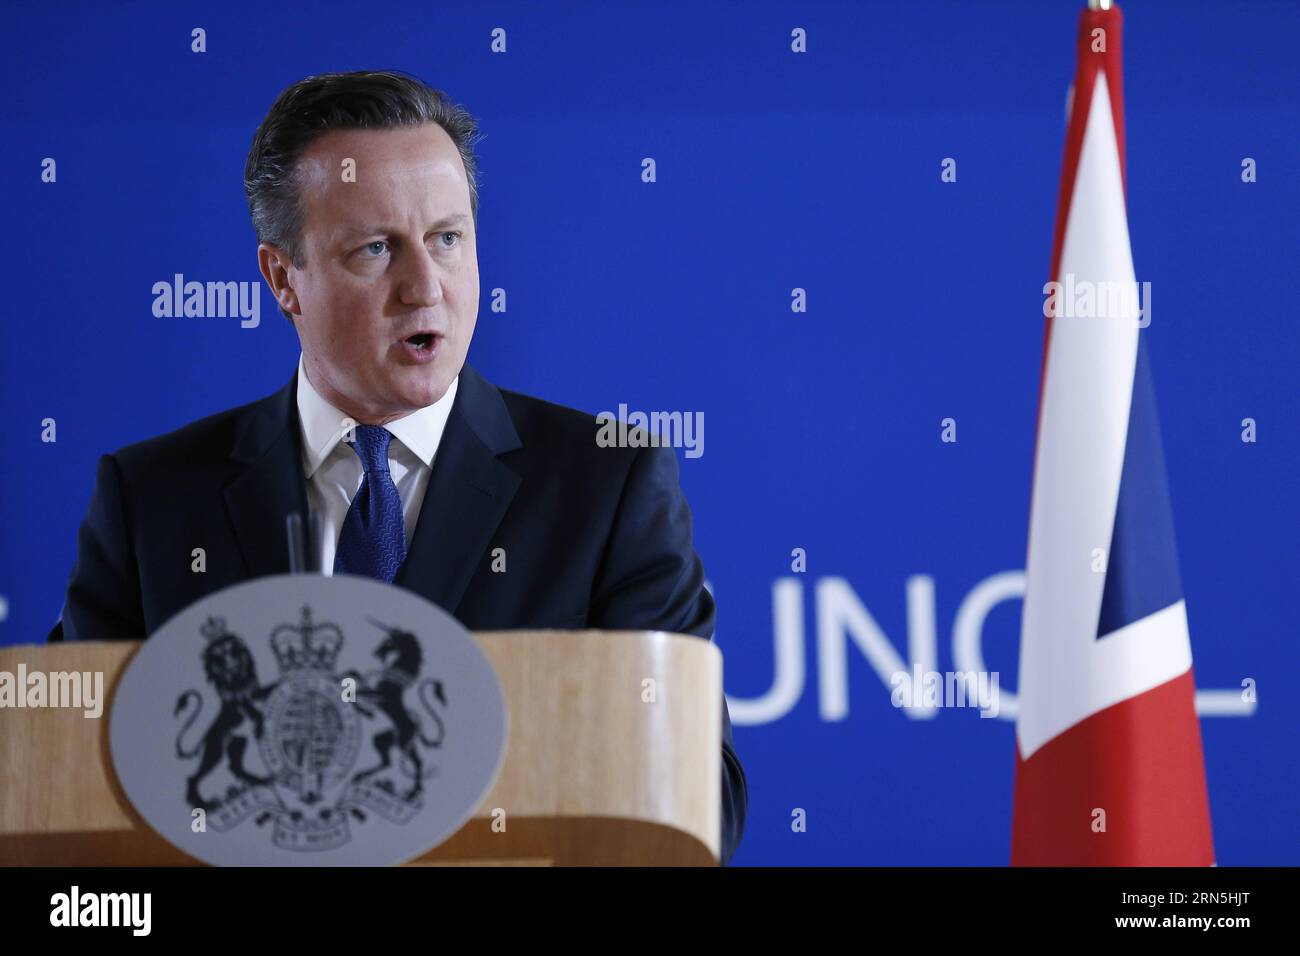 (150626) -- BRUSSELS, June 26, 2015 -- British Prime Minister David Cameron speaks during a press conference after an EU summit in Brussels, Belgium, June 26, 2015. ) BELGIUM-EU-SUMMIT YexPingfan PUBLICATIONxNOTxINxCHN   150626 Brussels June 26 2015 British Prime Ministers David Cameron Speaks during a Press Conference After to EU Summit in Brussels Belgium June 26 2015 Belgium EU Summit YexPingfan PUBLICATIONxNOTxINxCHN Stock Photo